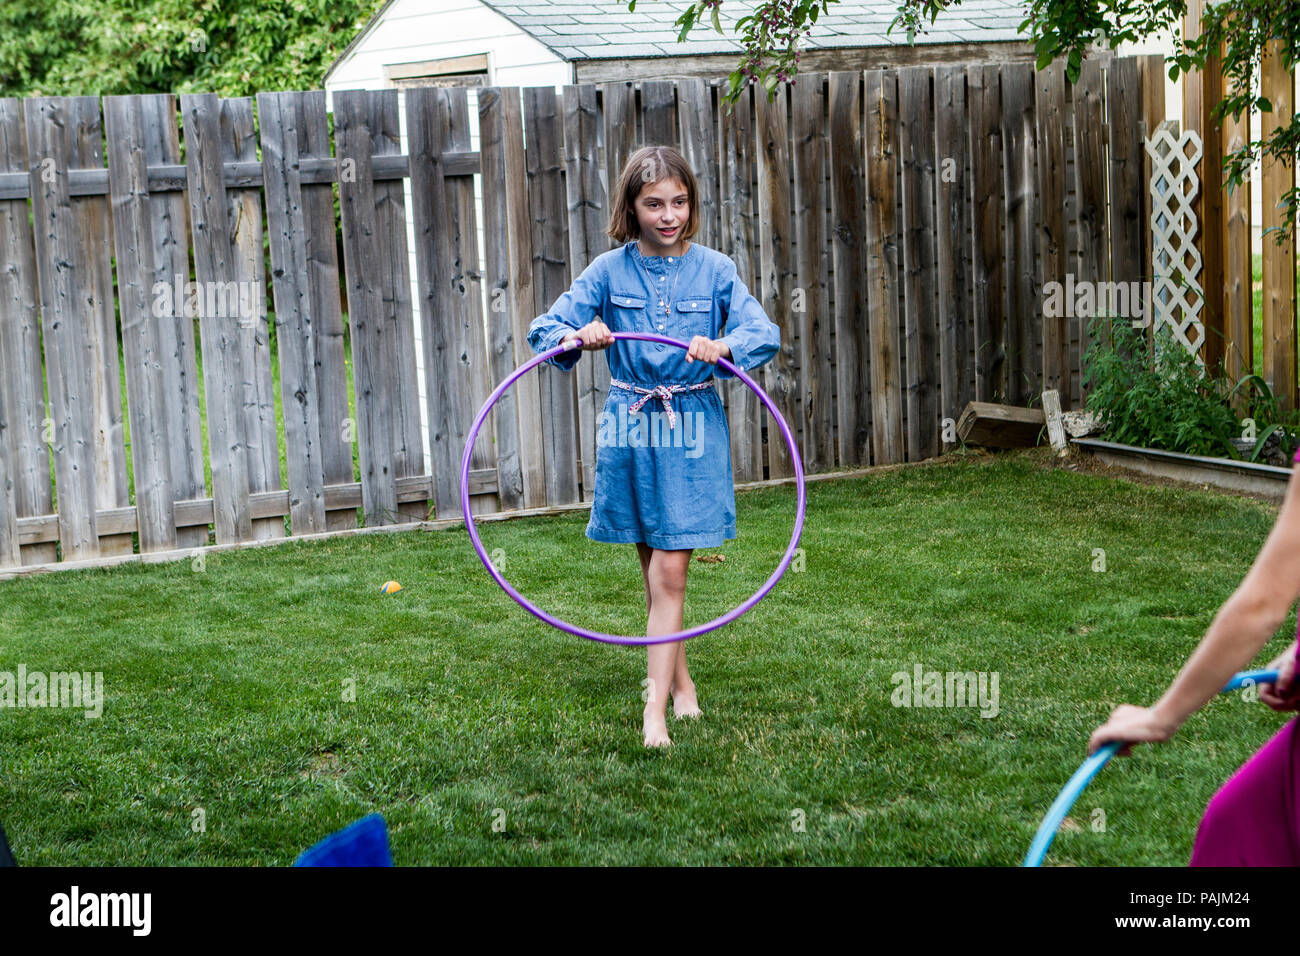 Young cute girl, in backyard, on the grass, play with hula hoop. Model  Release #104 Stock Photo - Alamy